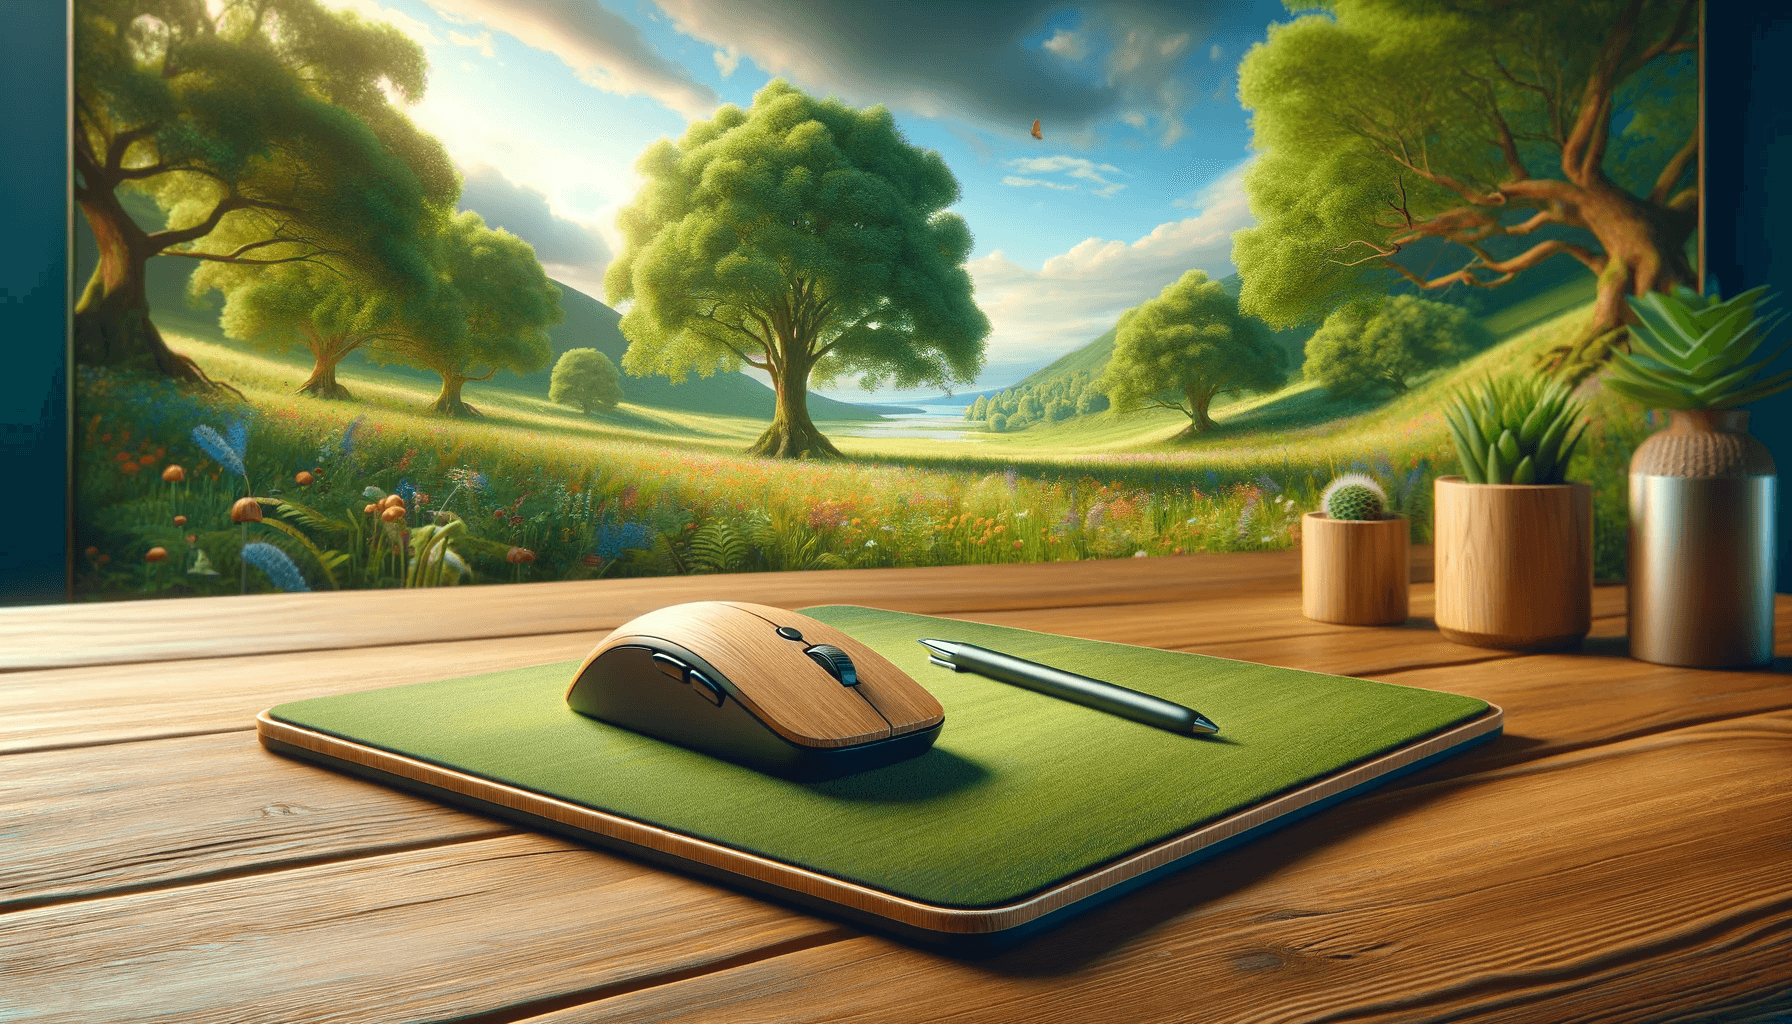 A digital artwork showing a mouse and trackpad placed on a wooden desk. The background features a vibrant ecological scene with lush green trees